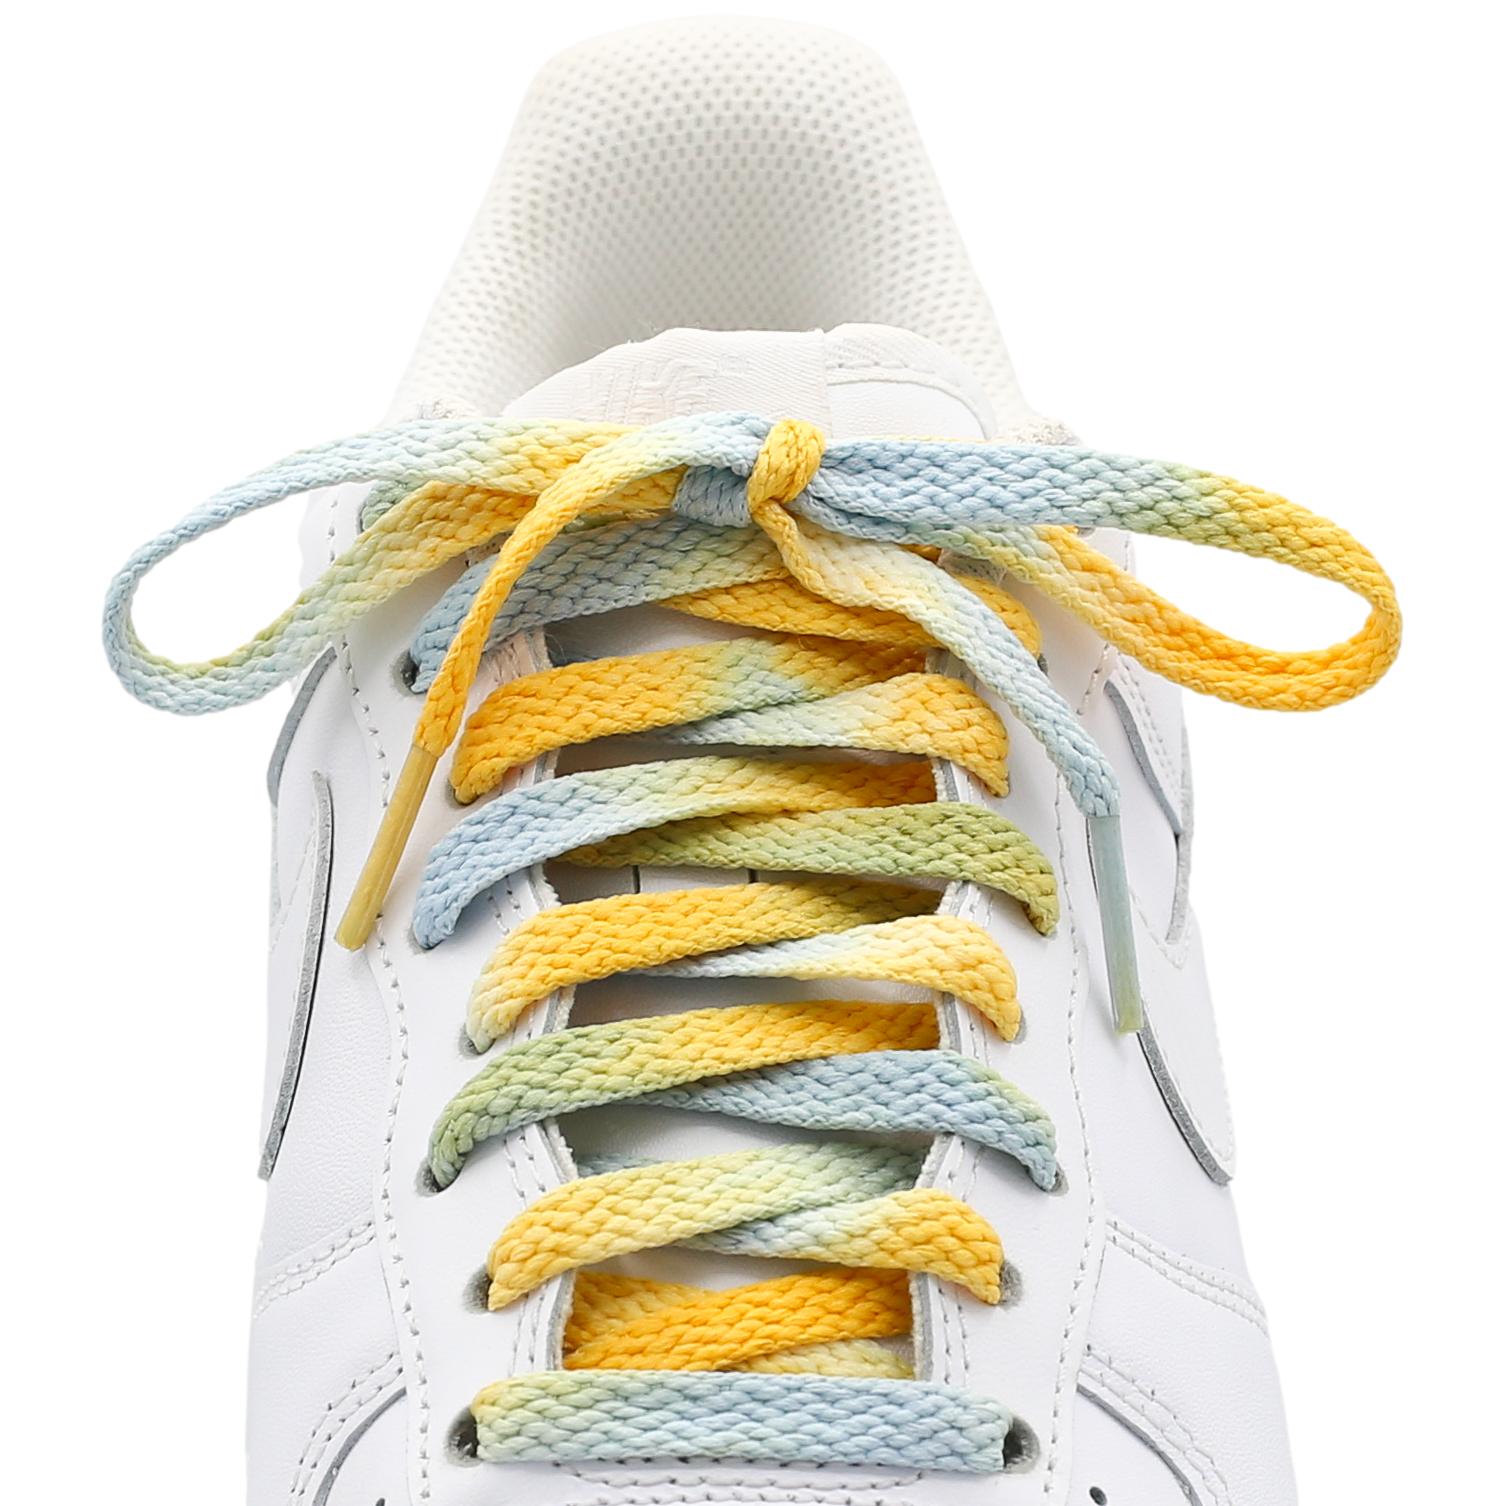 Vintage Faded Laces - Shoe Lace Supply